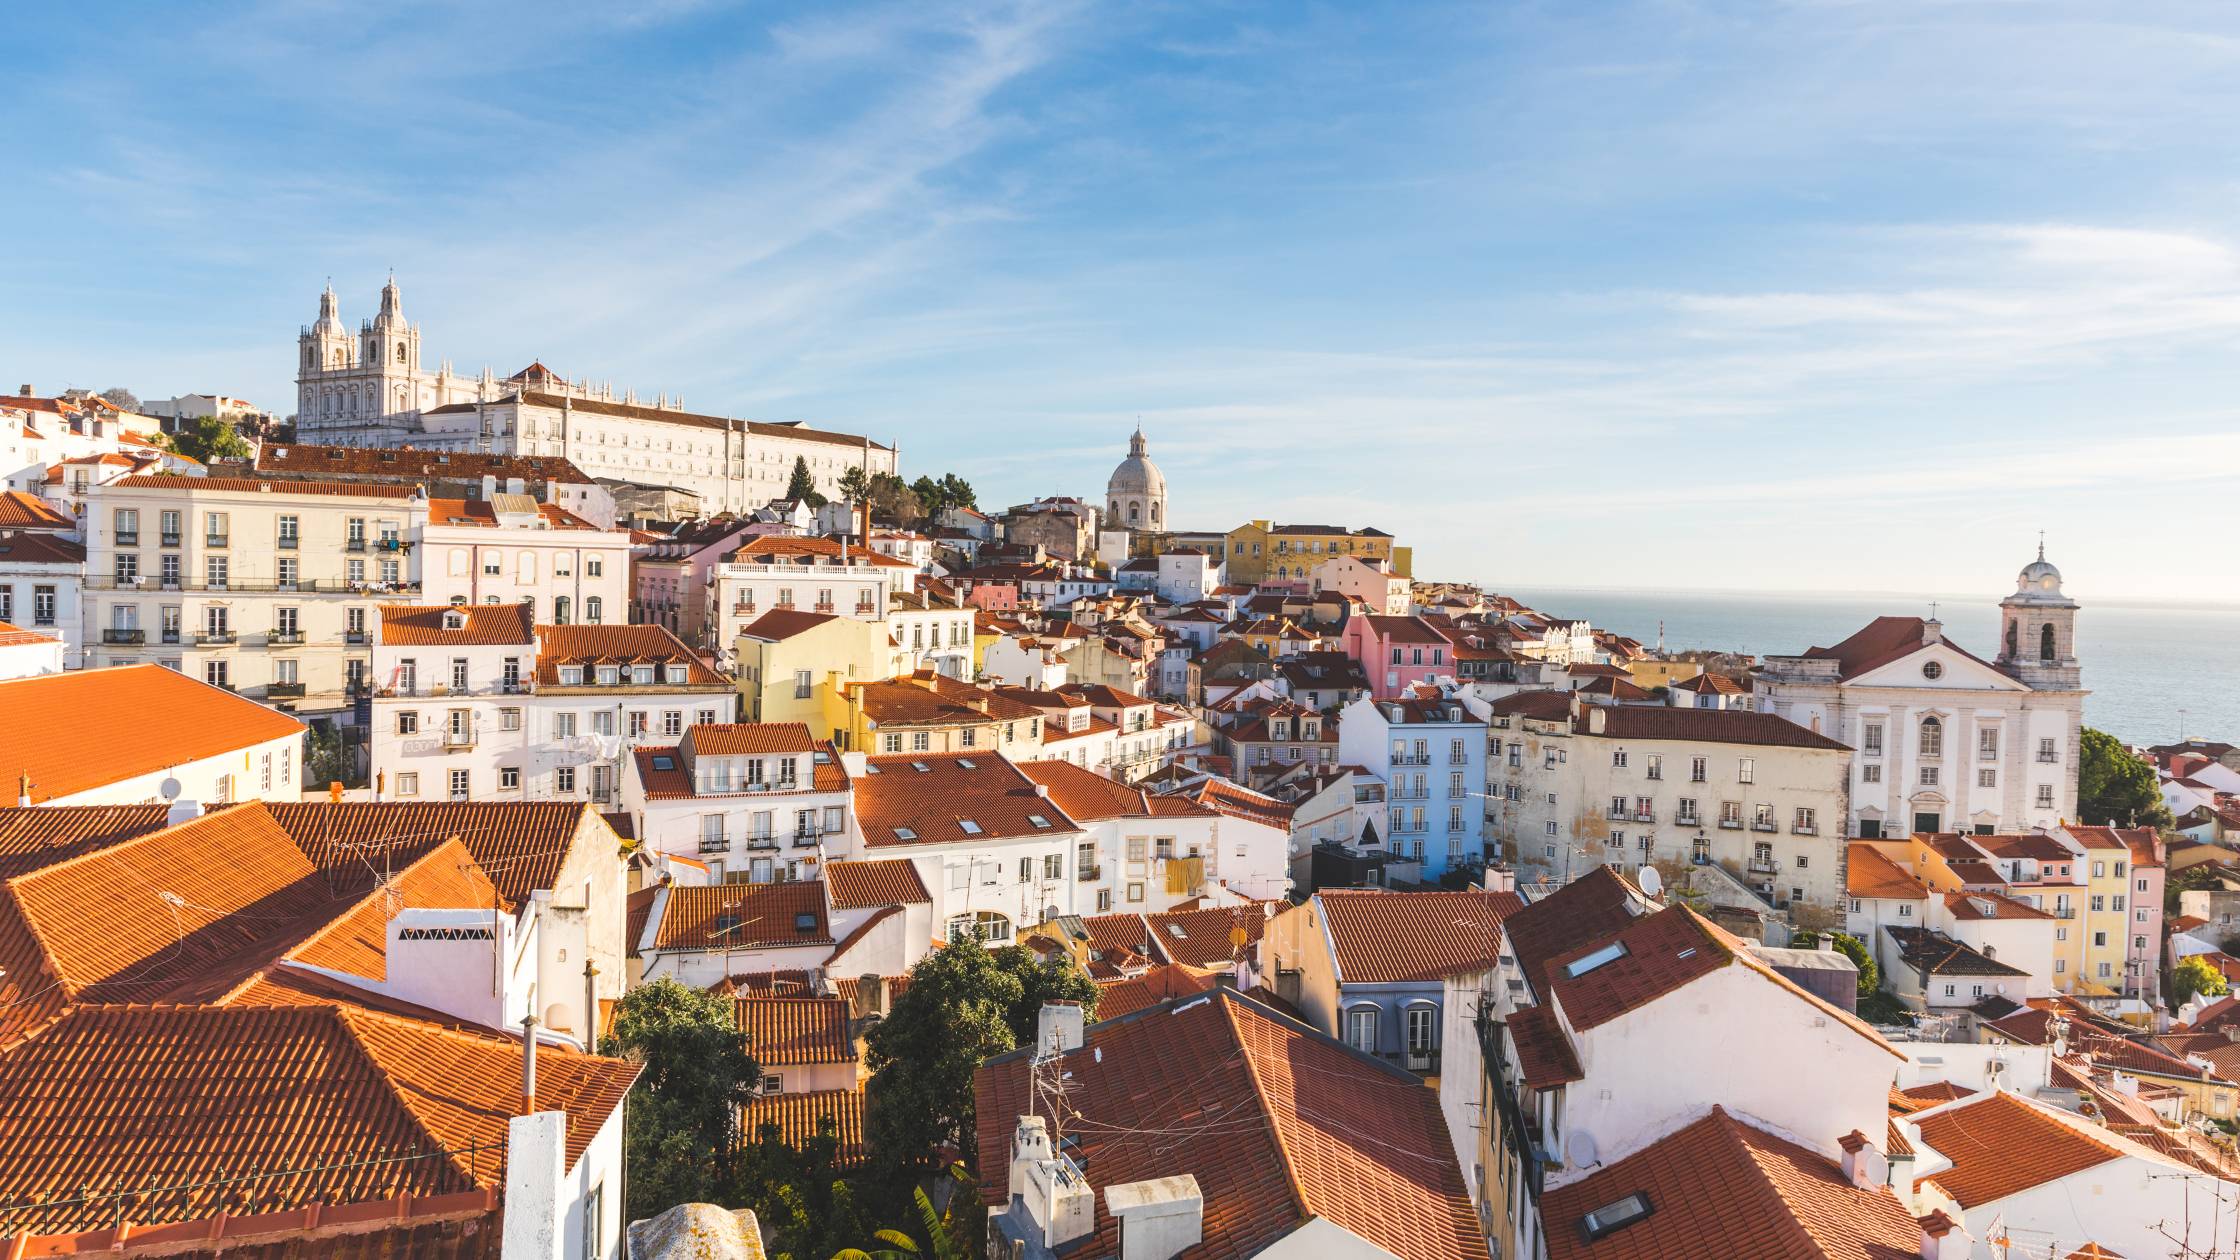 The Ten Most Beautiful Places in Portugal according to Artificial Intelligence